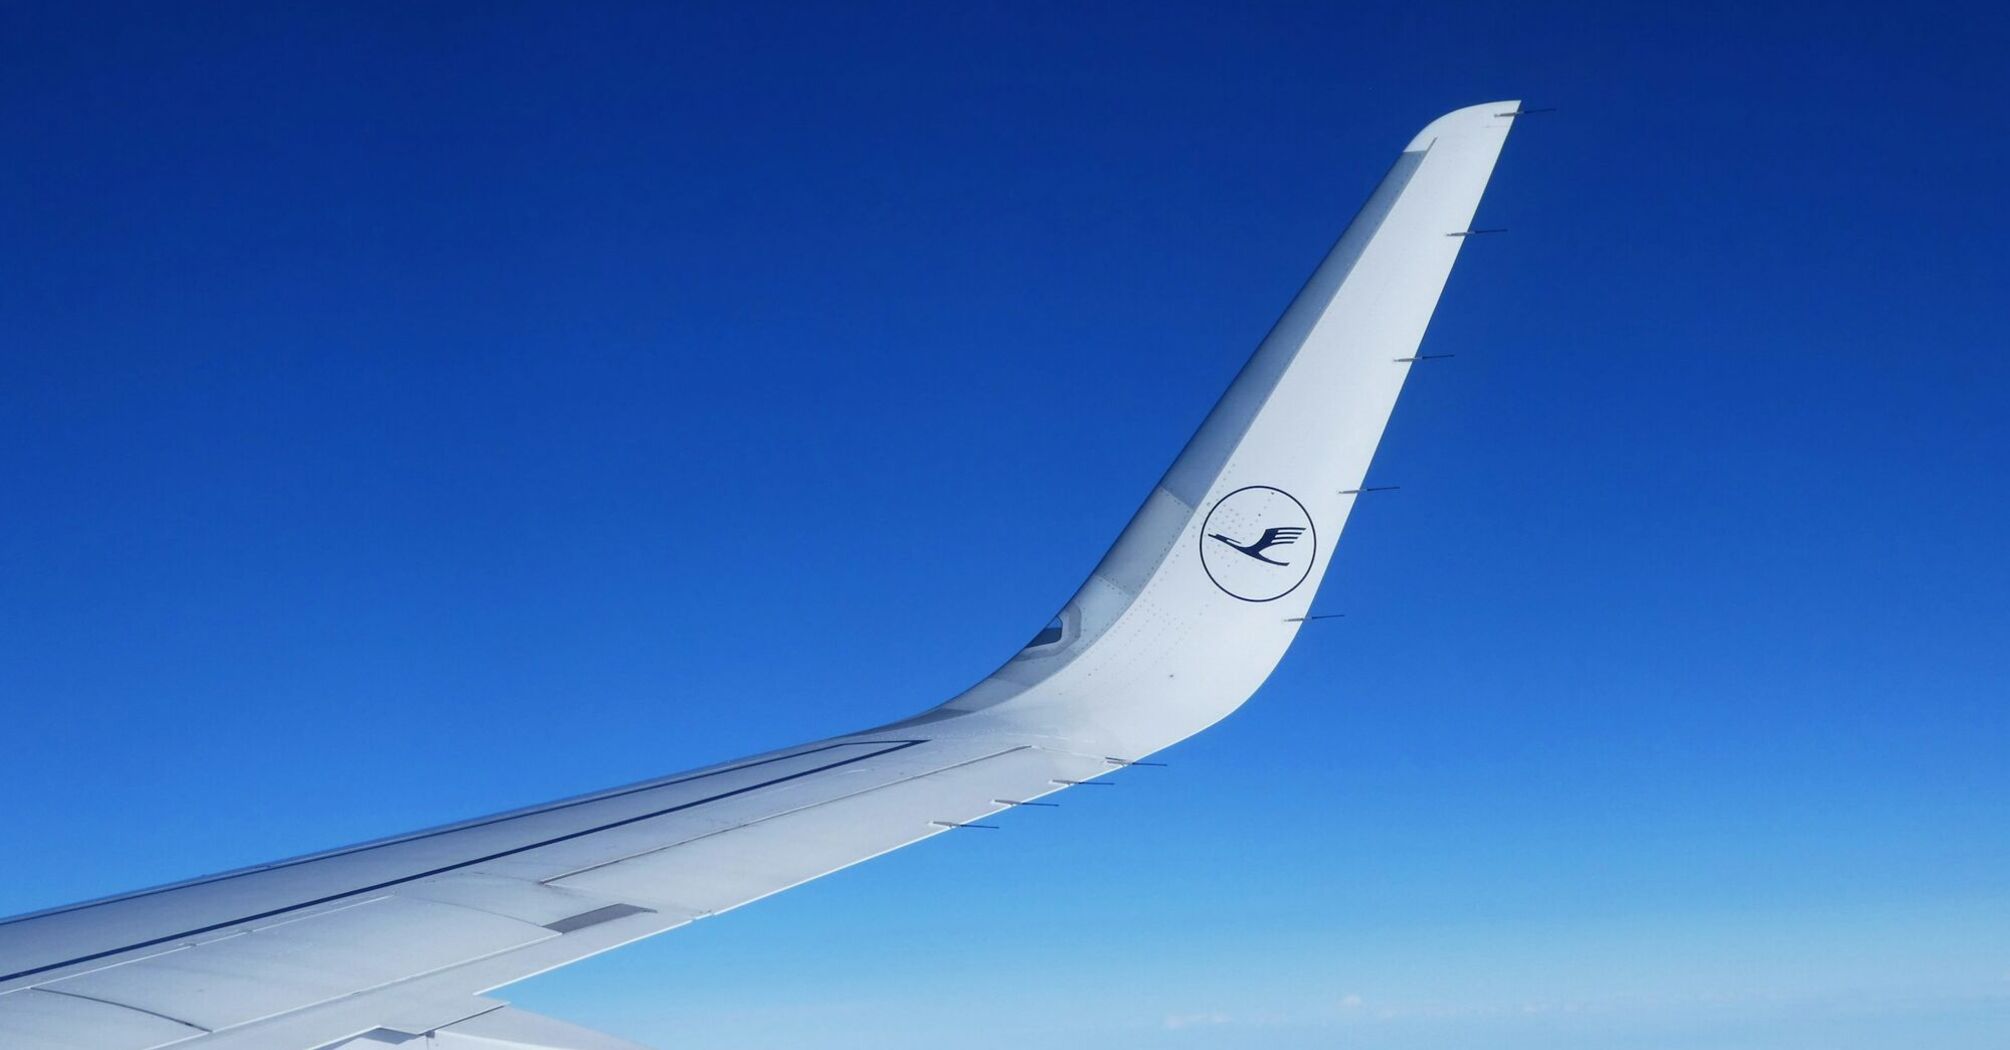 Lufthansa airplane wing against a clear blue sky